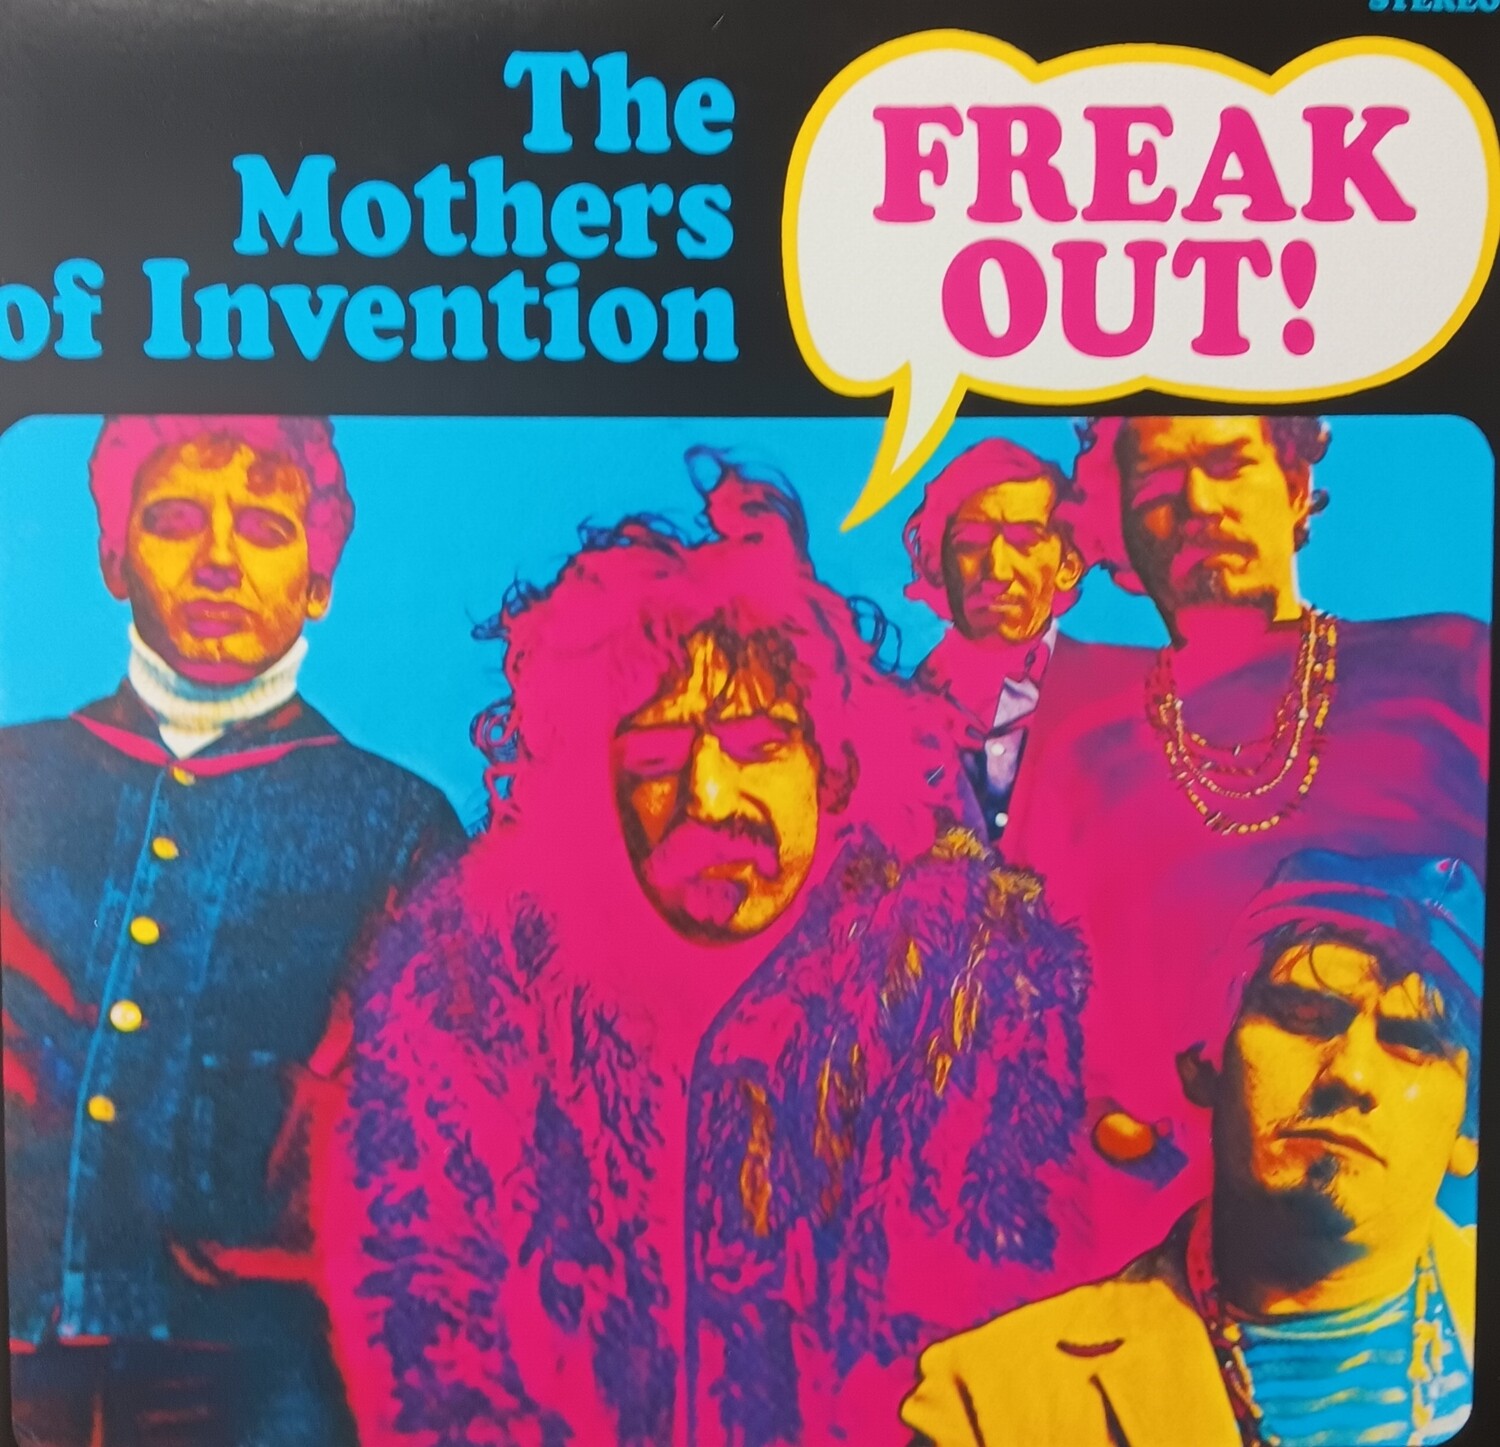 THE MOTHERS OF INVENTION & FRANK ZAPPA - Freak Out